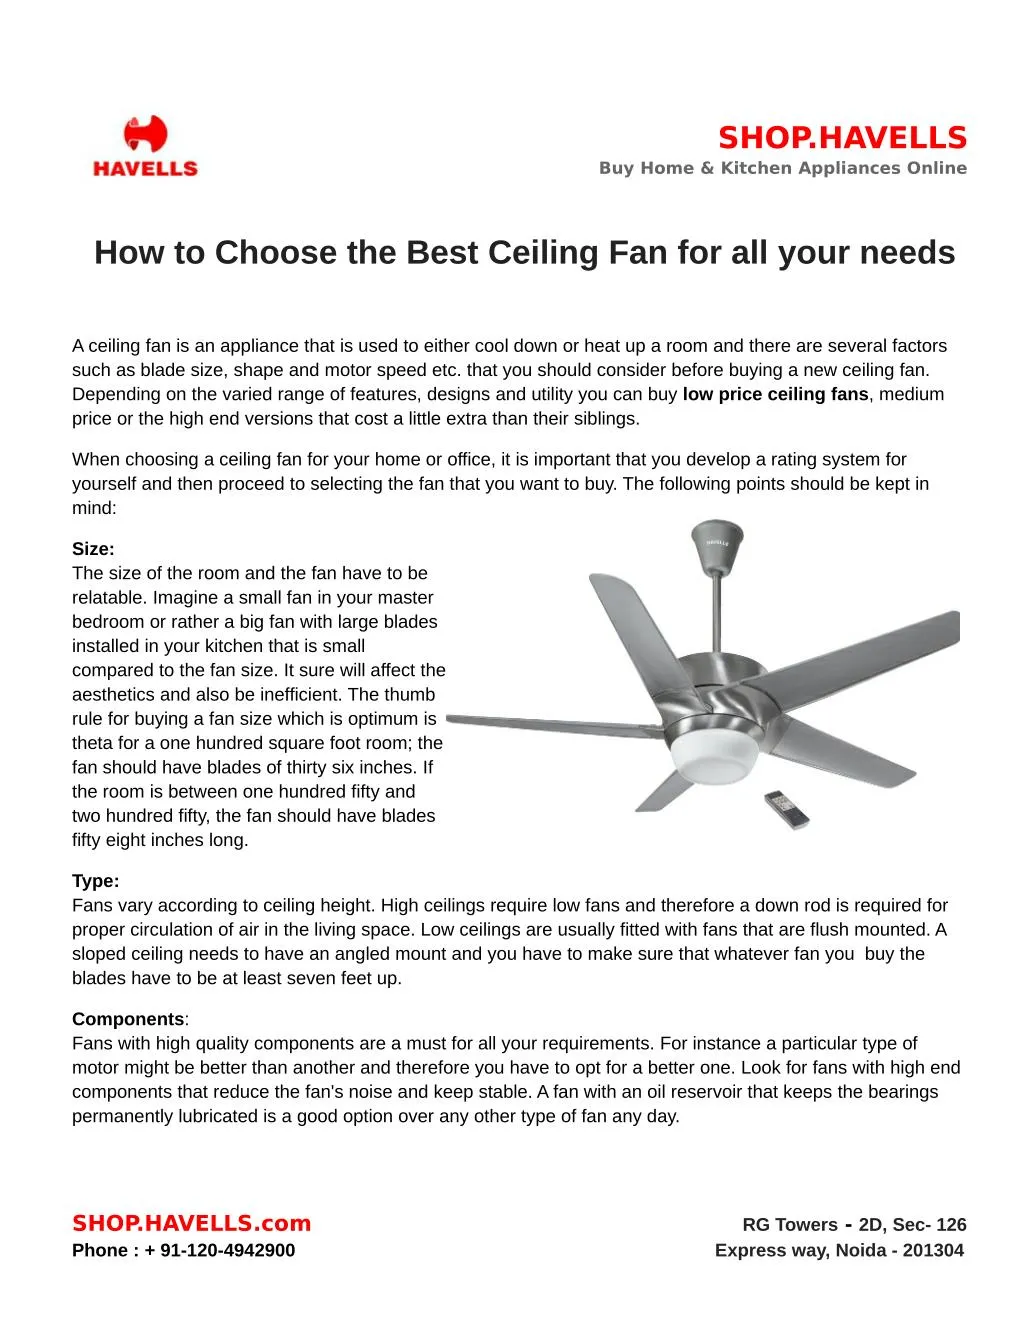 Ppt How To Choose The Best Ceiling Fan For All Your Needs